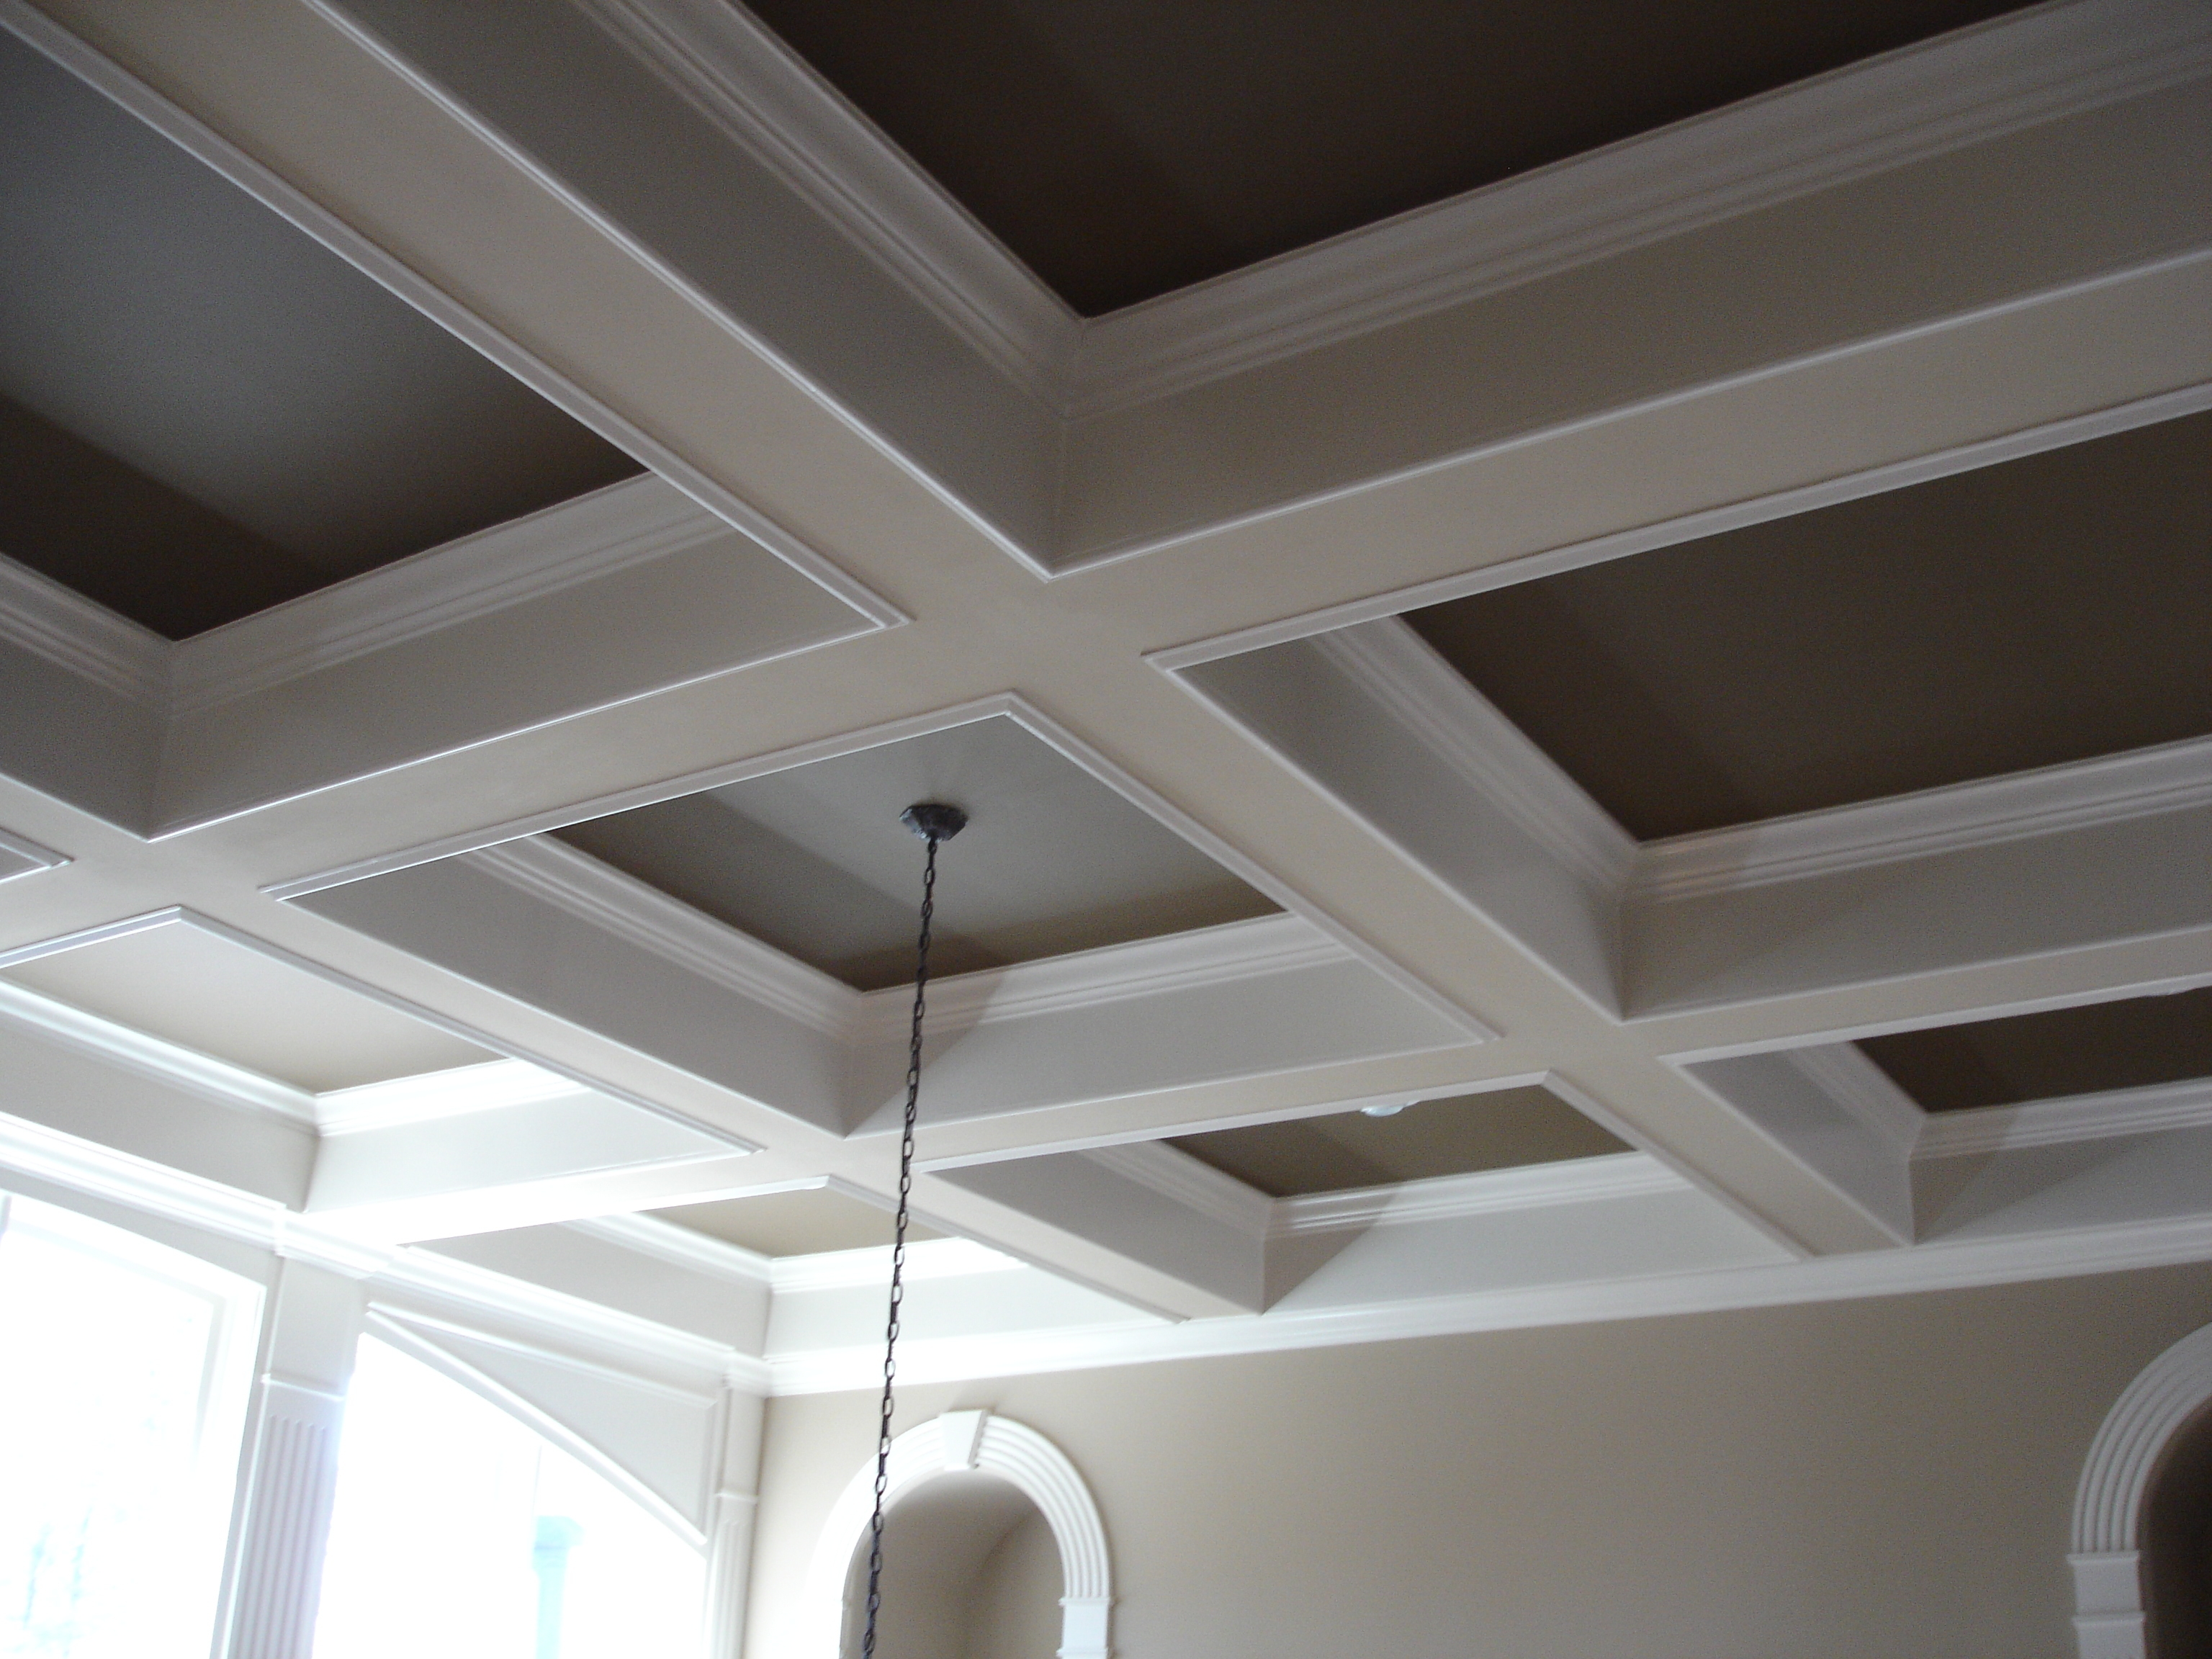 Anderson Coffered Ceiling Tiles Anderson Coffered Ceiling Tiles 1434x1076px ceiling image for mac 83 1470770584 3072 X 2304